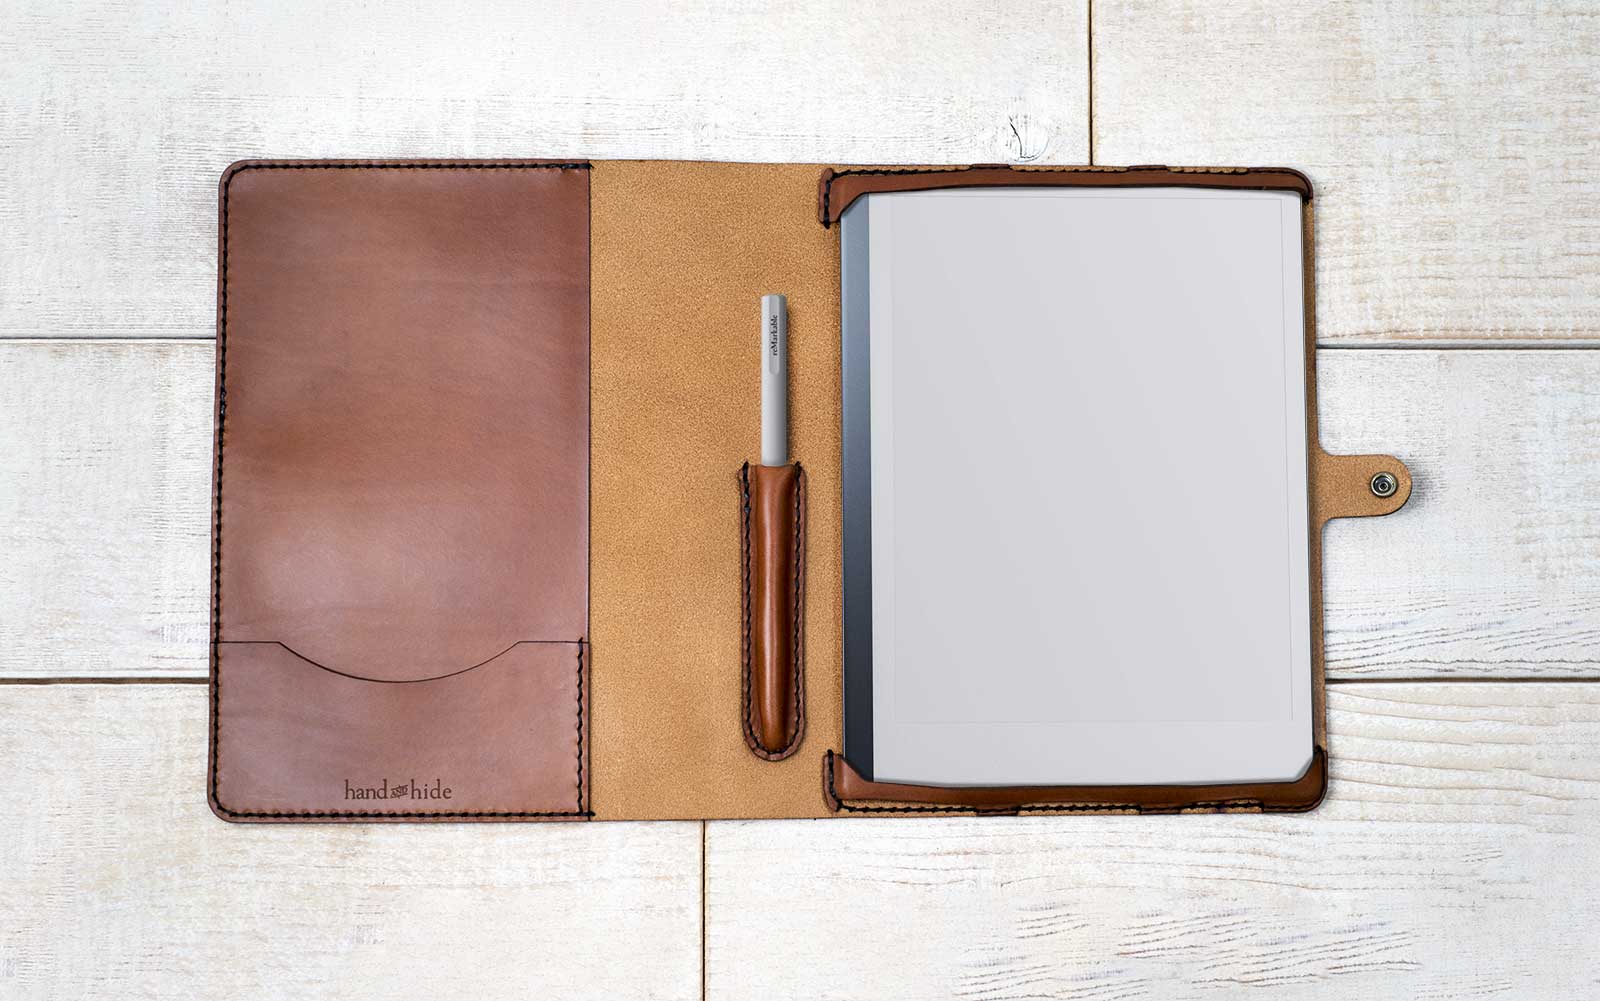 Hand and Hide Leather Tablet Case for reMarkable 2 Tablet - Hand and Hide  LLC